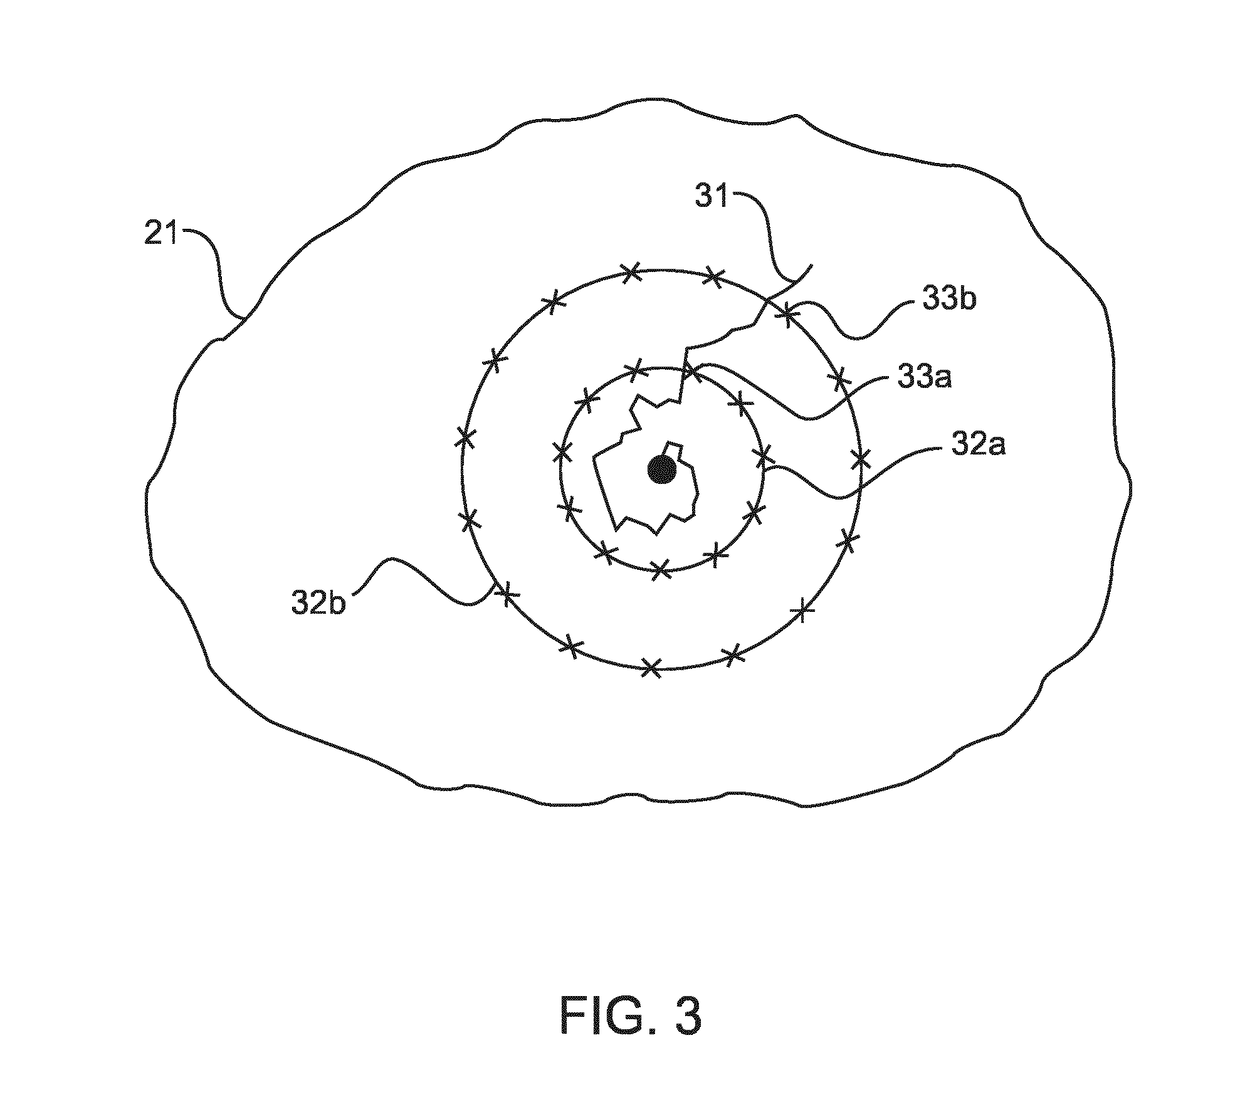 Radiation therapy system using plural treatment plans